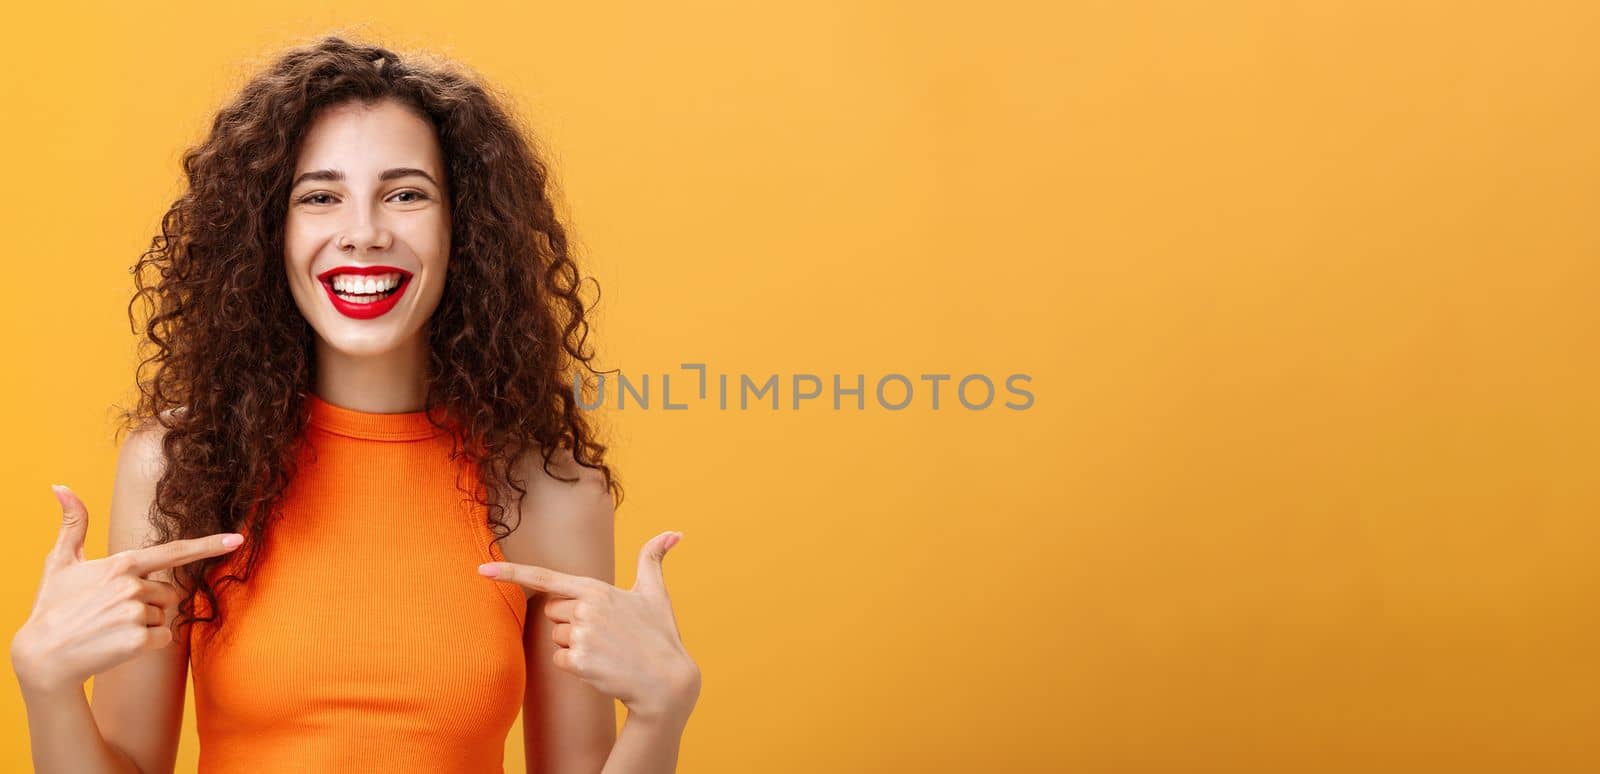 Waist-up shot of proud and happy outgoing charming woman with curly hair and red lipstick pointing at herself delighted and confident talking about own achievement over orange background. Copy space